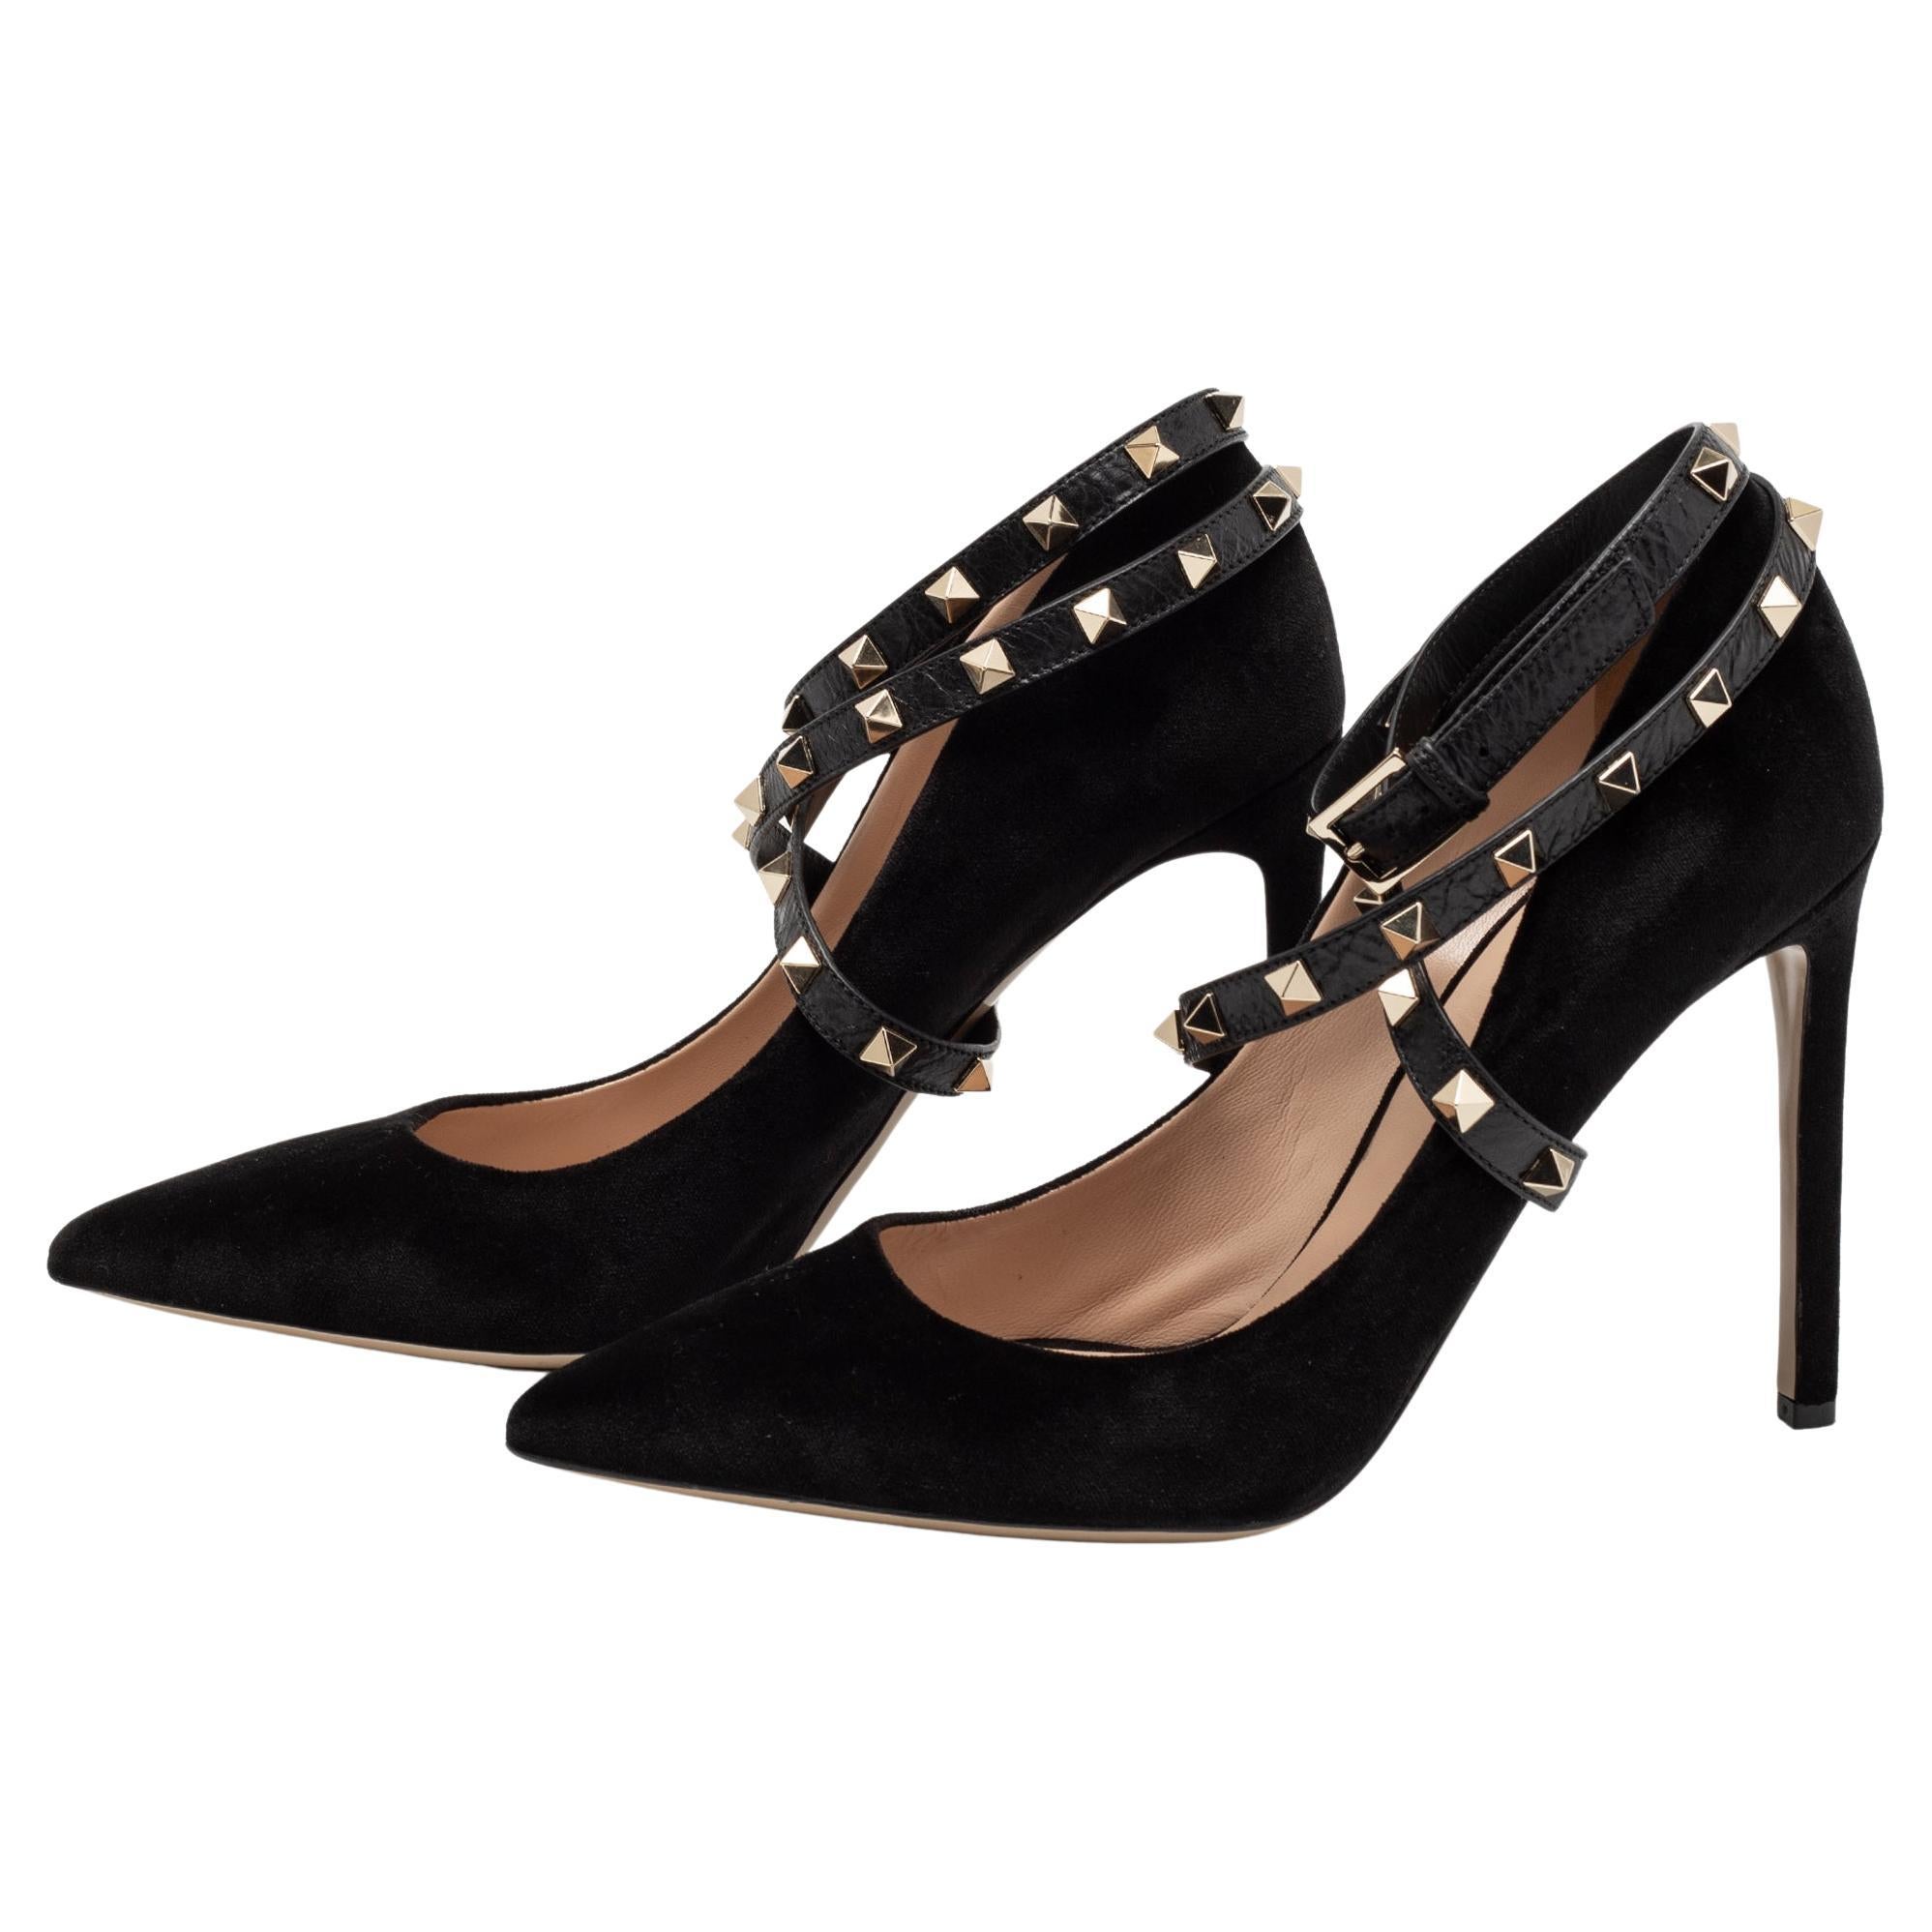 Valentino Black Velvet And Leather Rockstud Ankle Wrap Pointed Toe Pumps Size 41